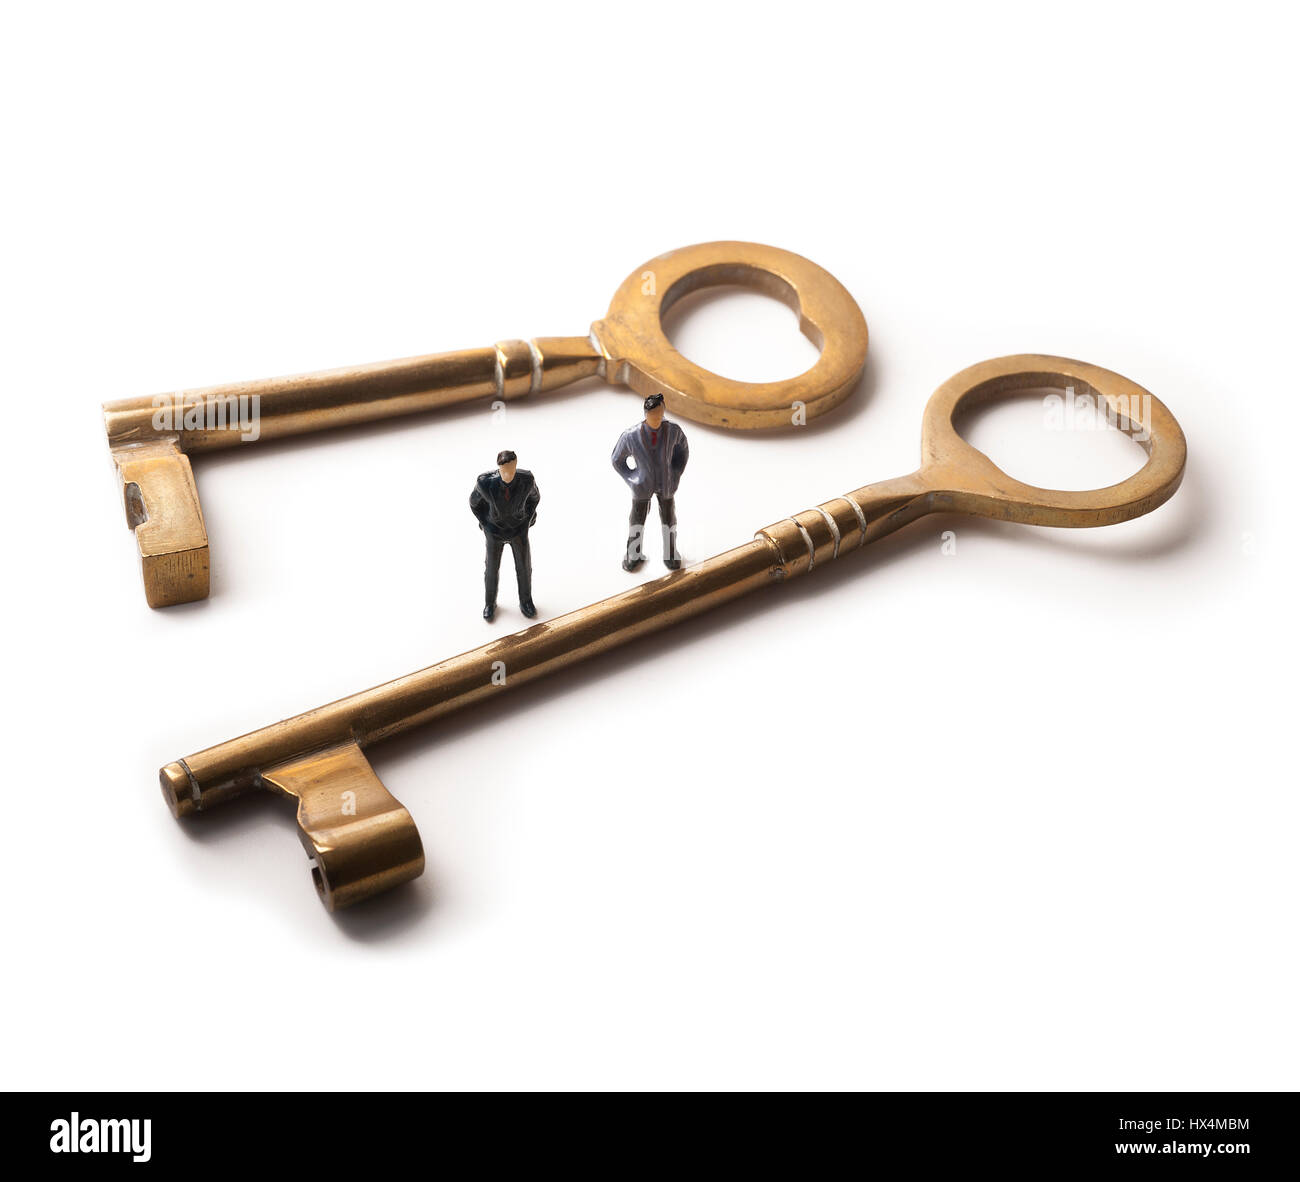 Two miniature figures standing between brass keys of varying sizes on white background Stock Photo